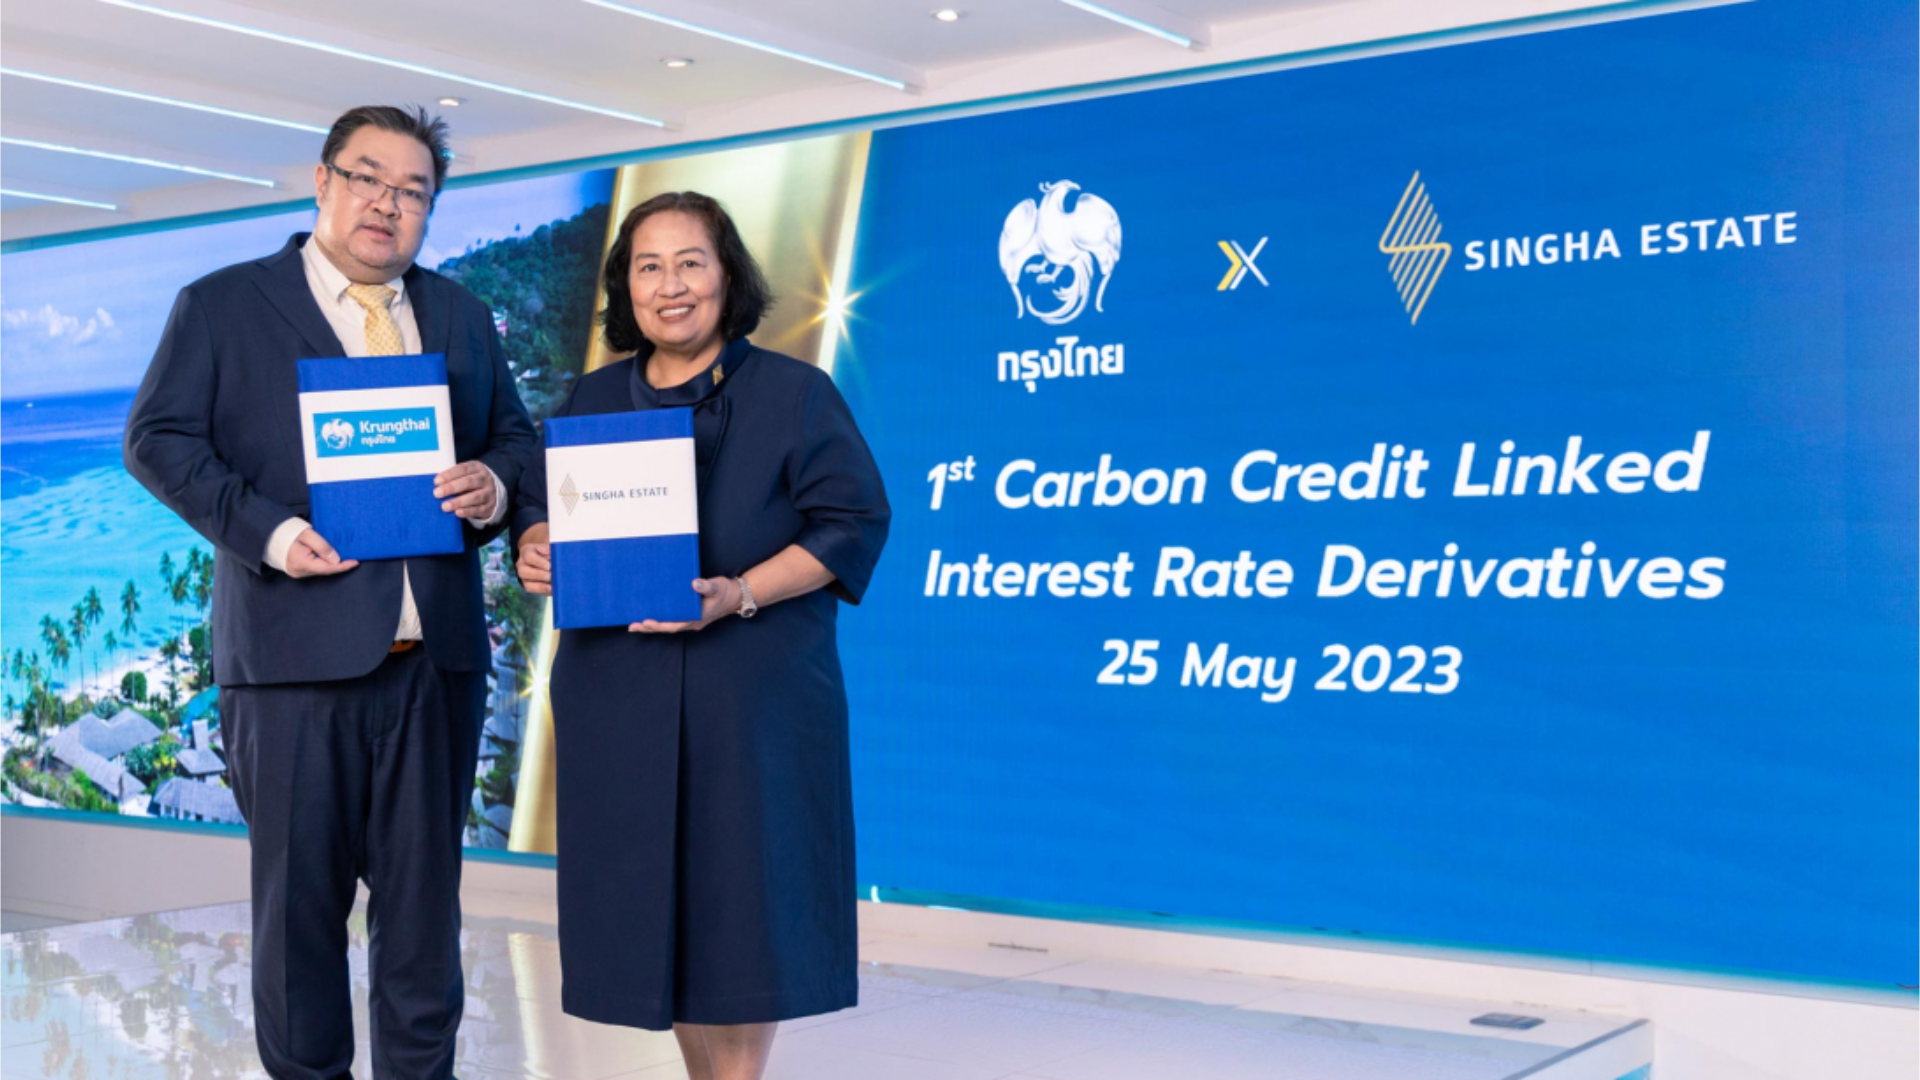 Singha Estate Group and Krungthai advance towards a net-zero goal with Thailand’s first carbon credit linked interest rate derivatives